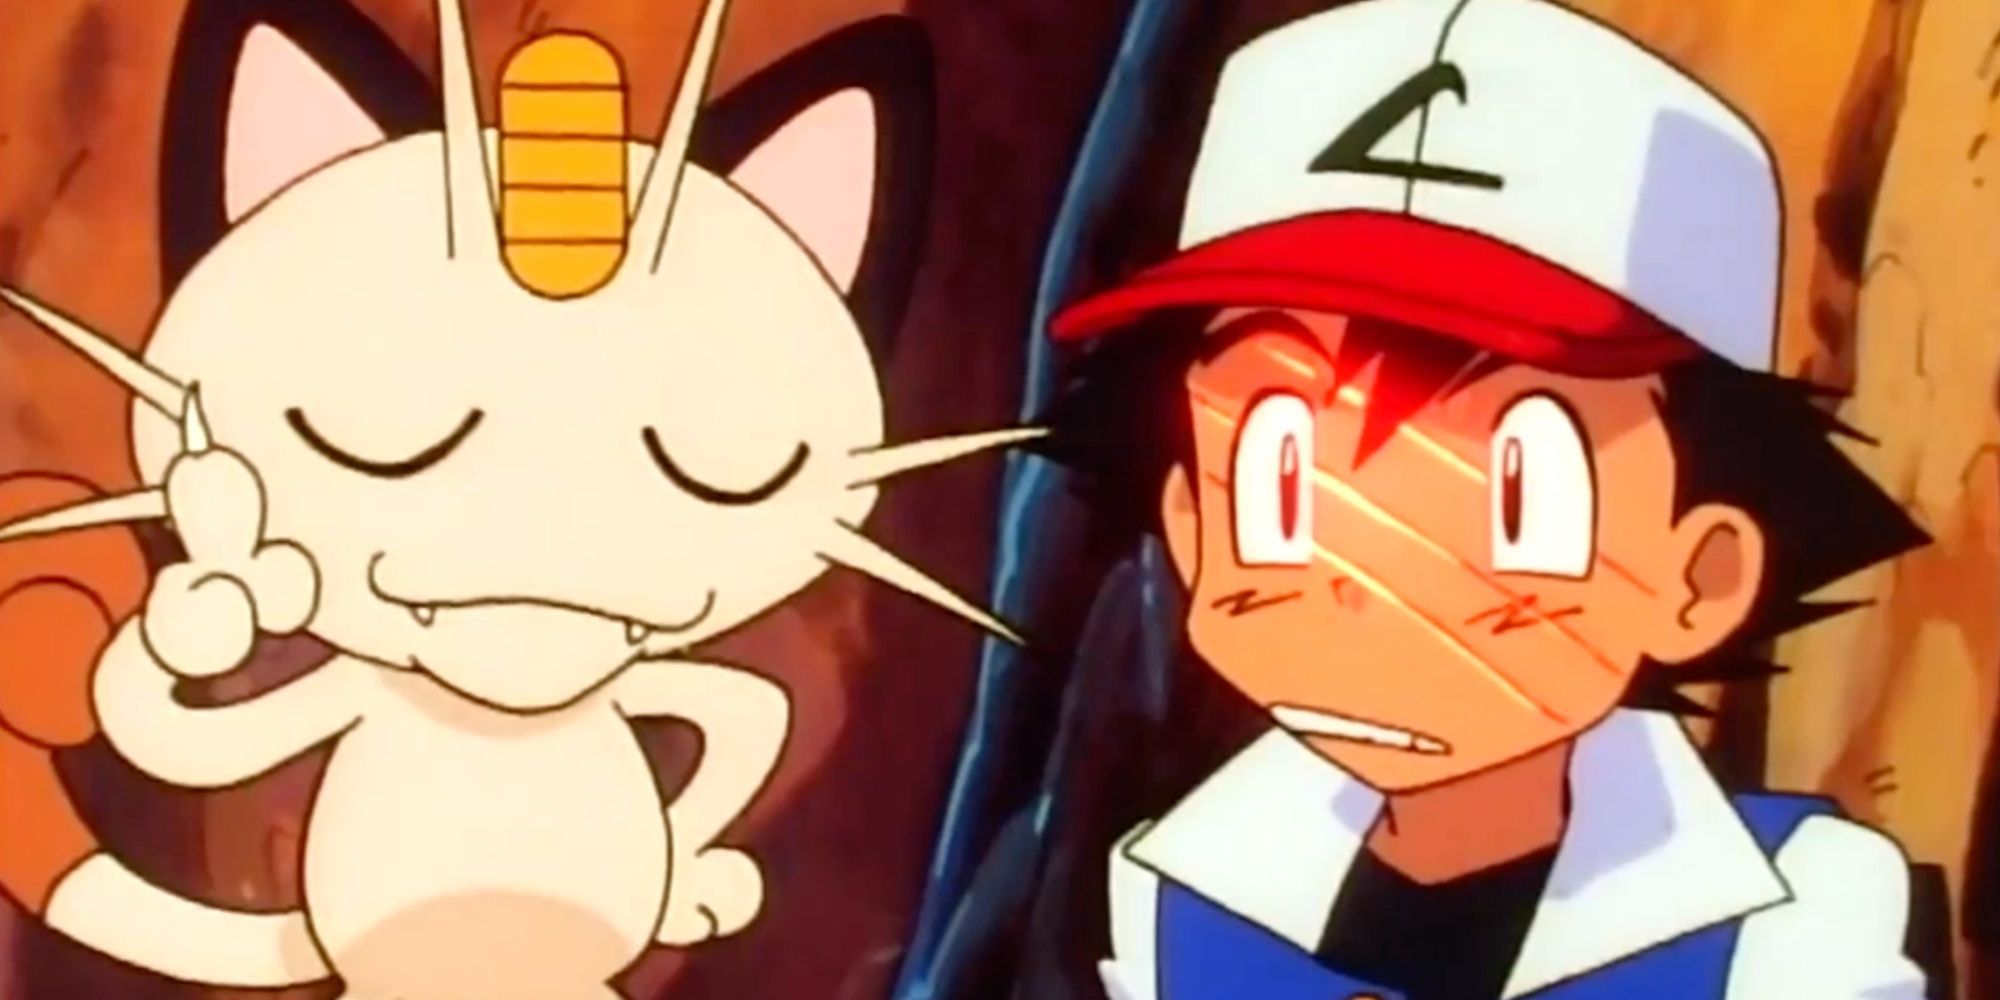 If Meowth can hold an empty pokéball without going inside it, he's been  caught, so who do u think is his trainer? : r/pokemonanime